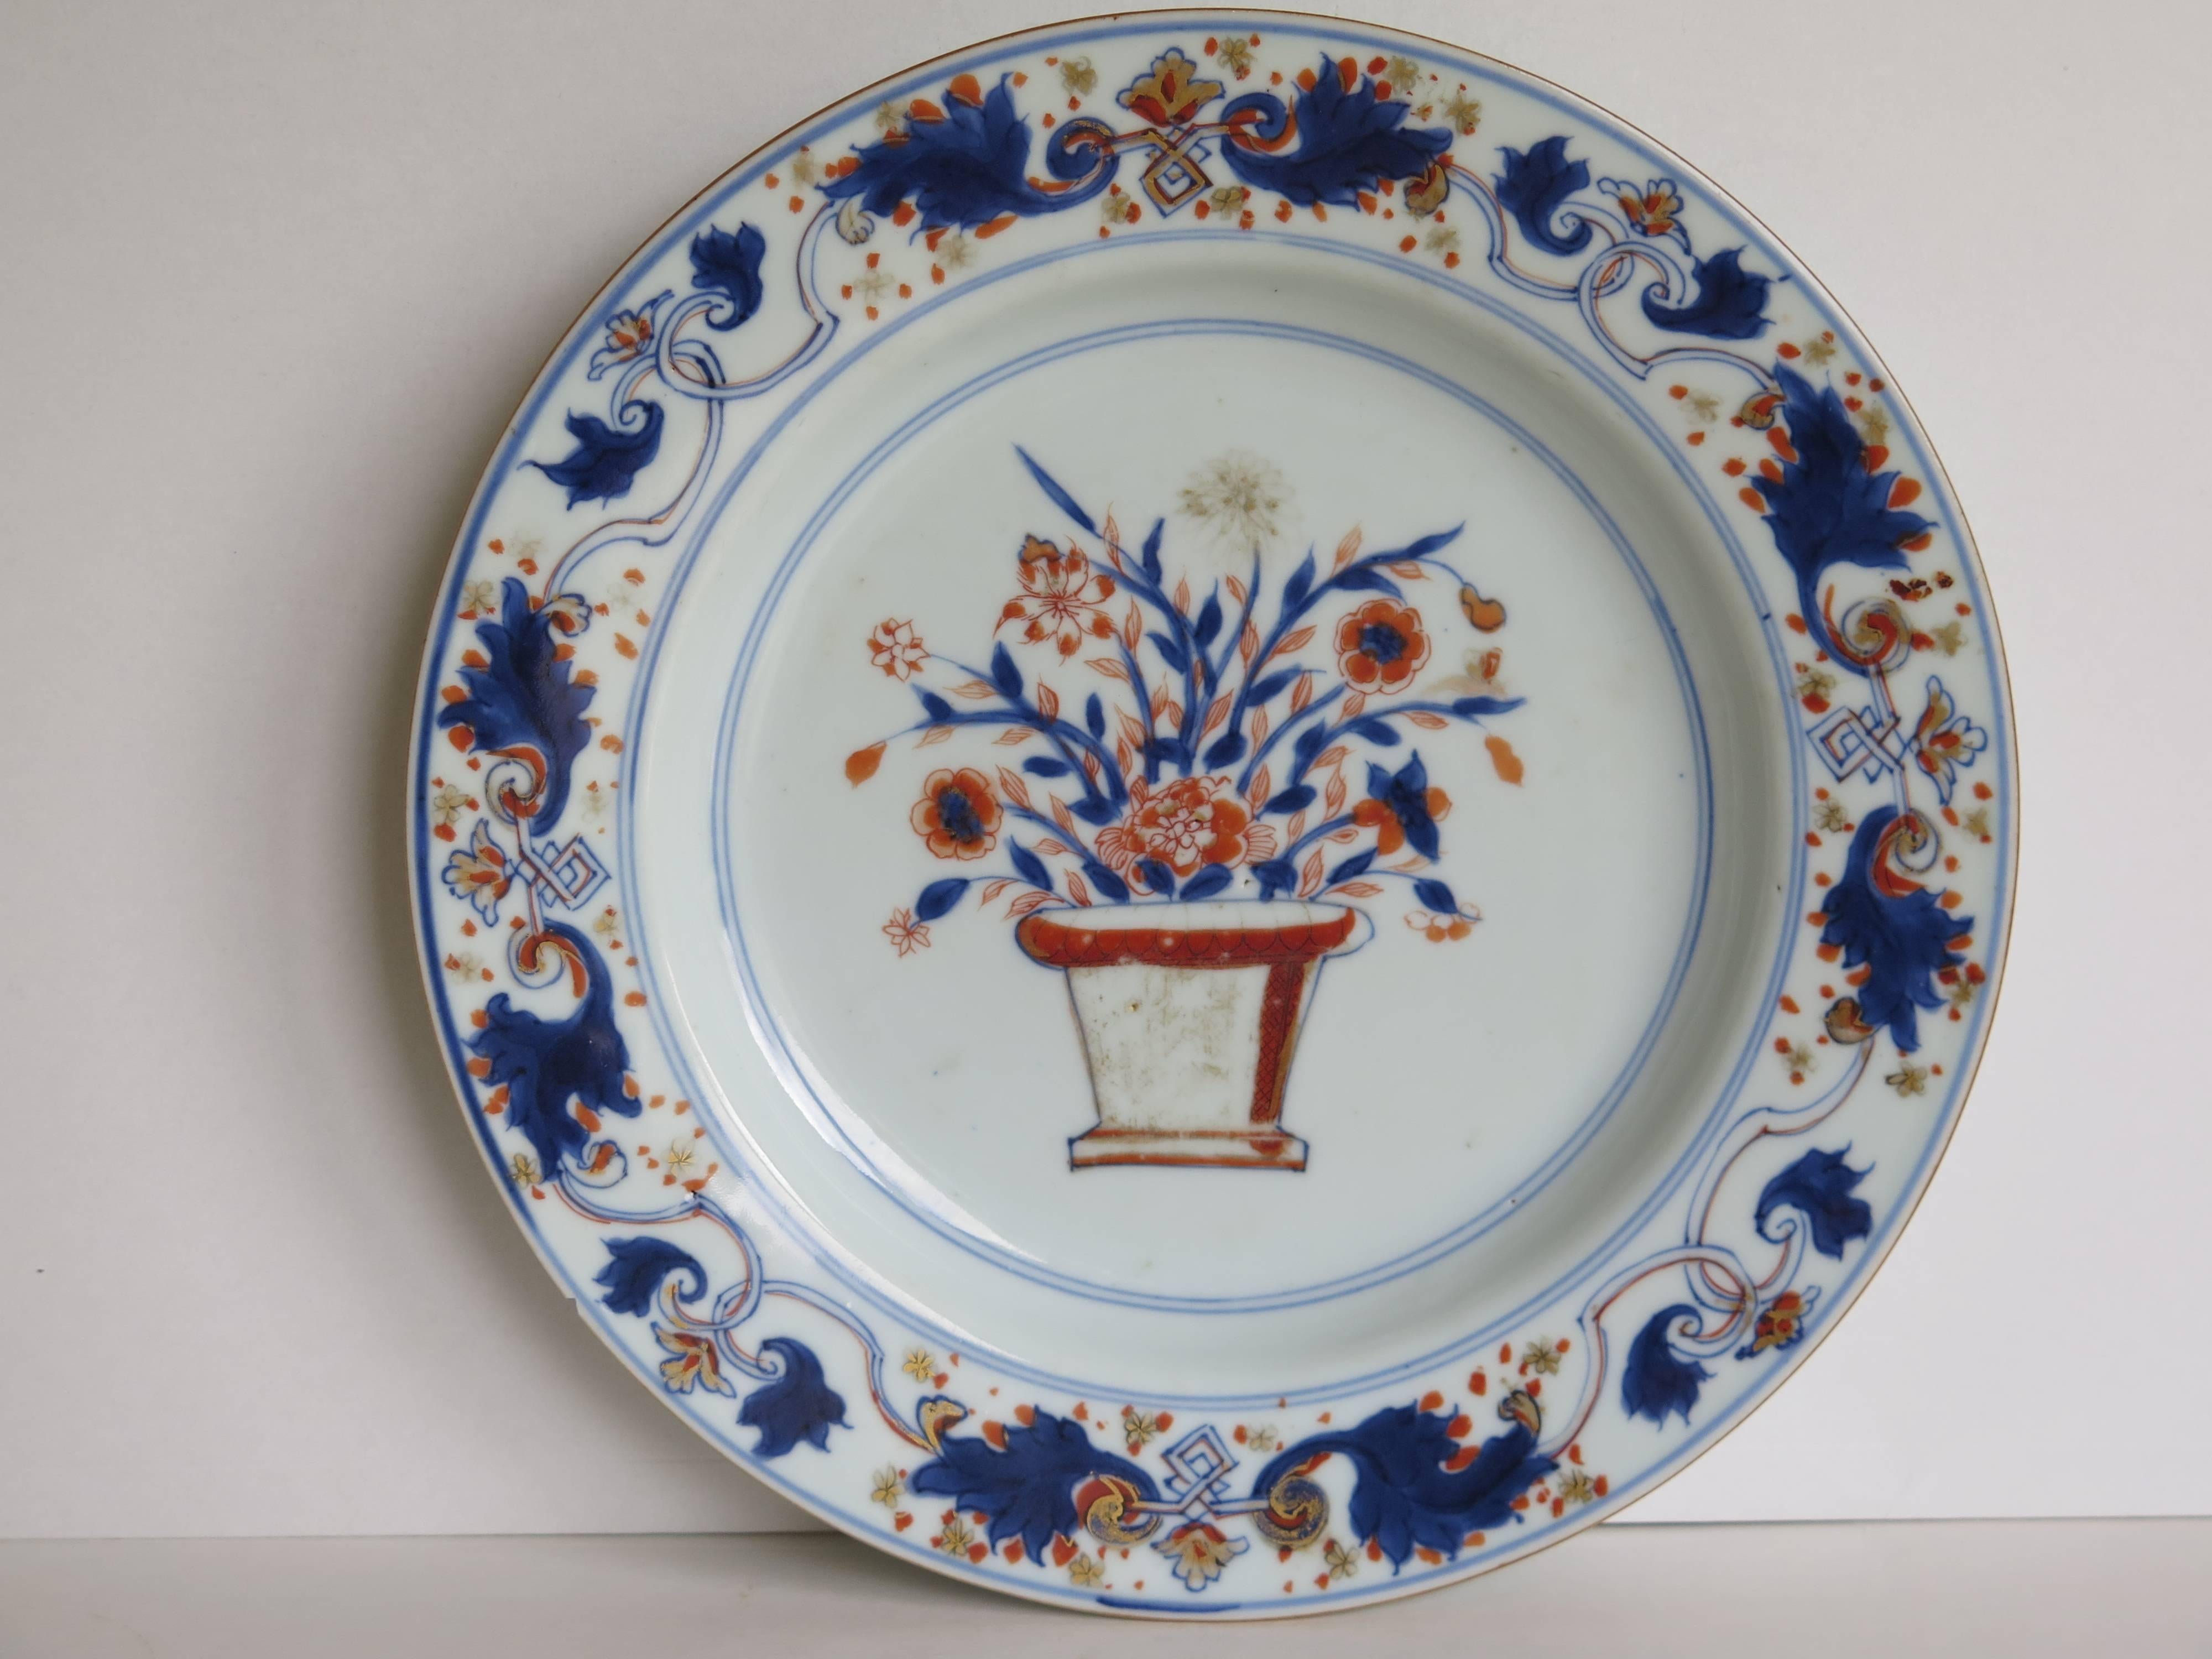 This is a very good Chinese porcelain plate from the early 18th century, Qing dynasty, probably Kangxi period, circa 1720 or slightly earlier.

The plate is well potted with a glassy white glaze having a soft blue tinge and a neatly cut foot